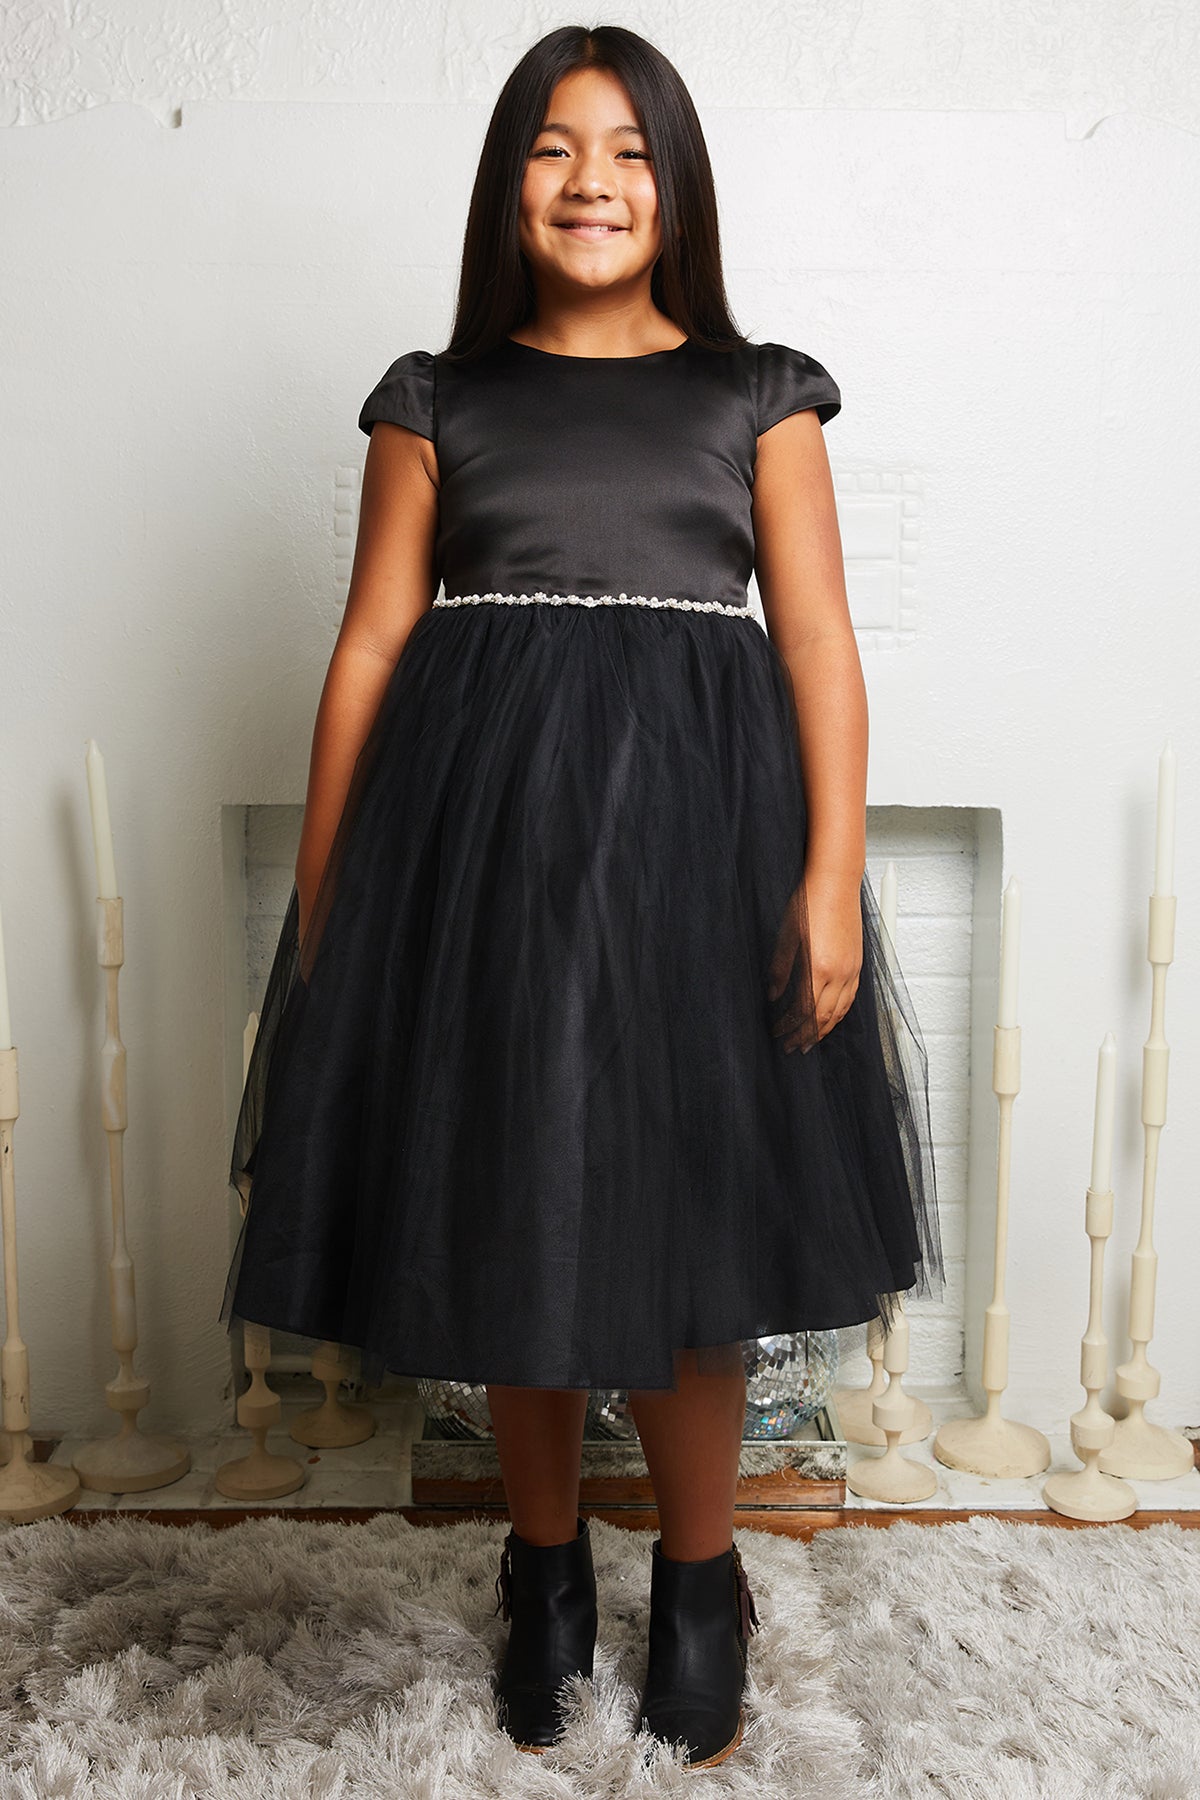 452-G Capped Sleeve Satin & Tulle Girls Dress with Rhinestone/Pearl Trim and Plus Sizes